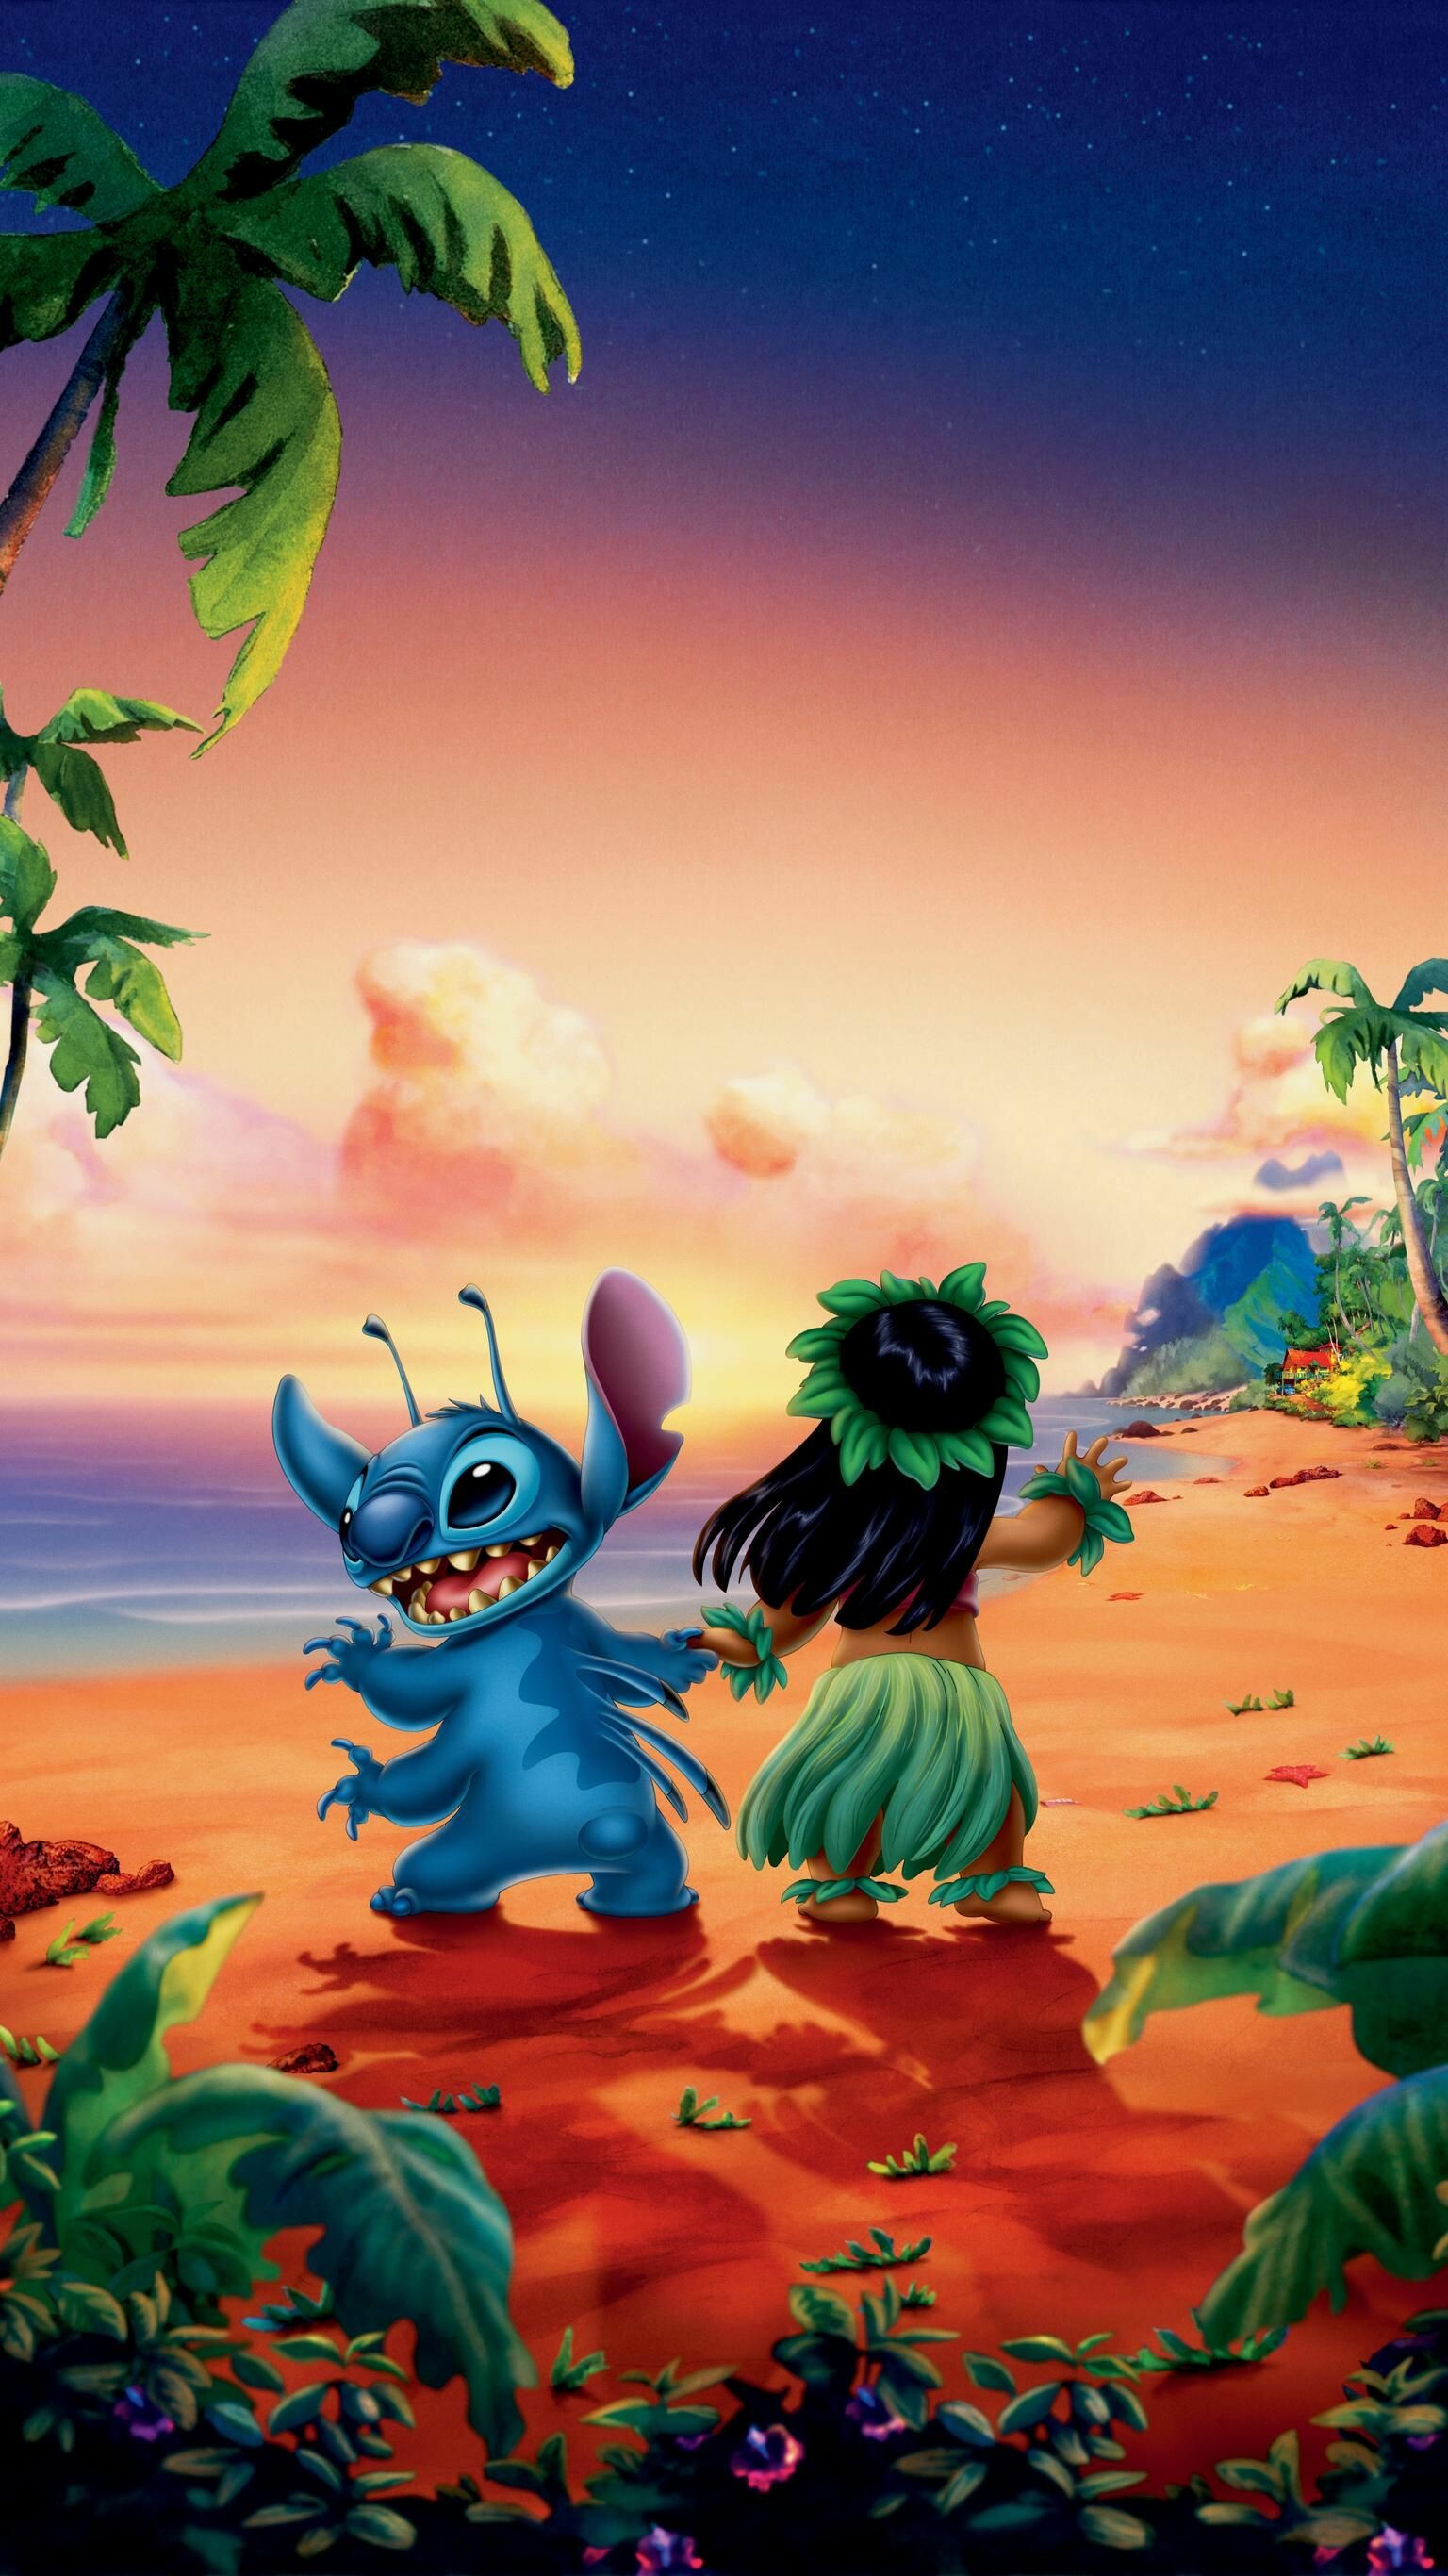 Lilo and Stitch: Disney, A sequel spin-off of the 2002 feature film of the same name. 1540x2740 HD Wallpaper.